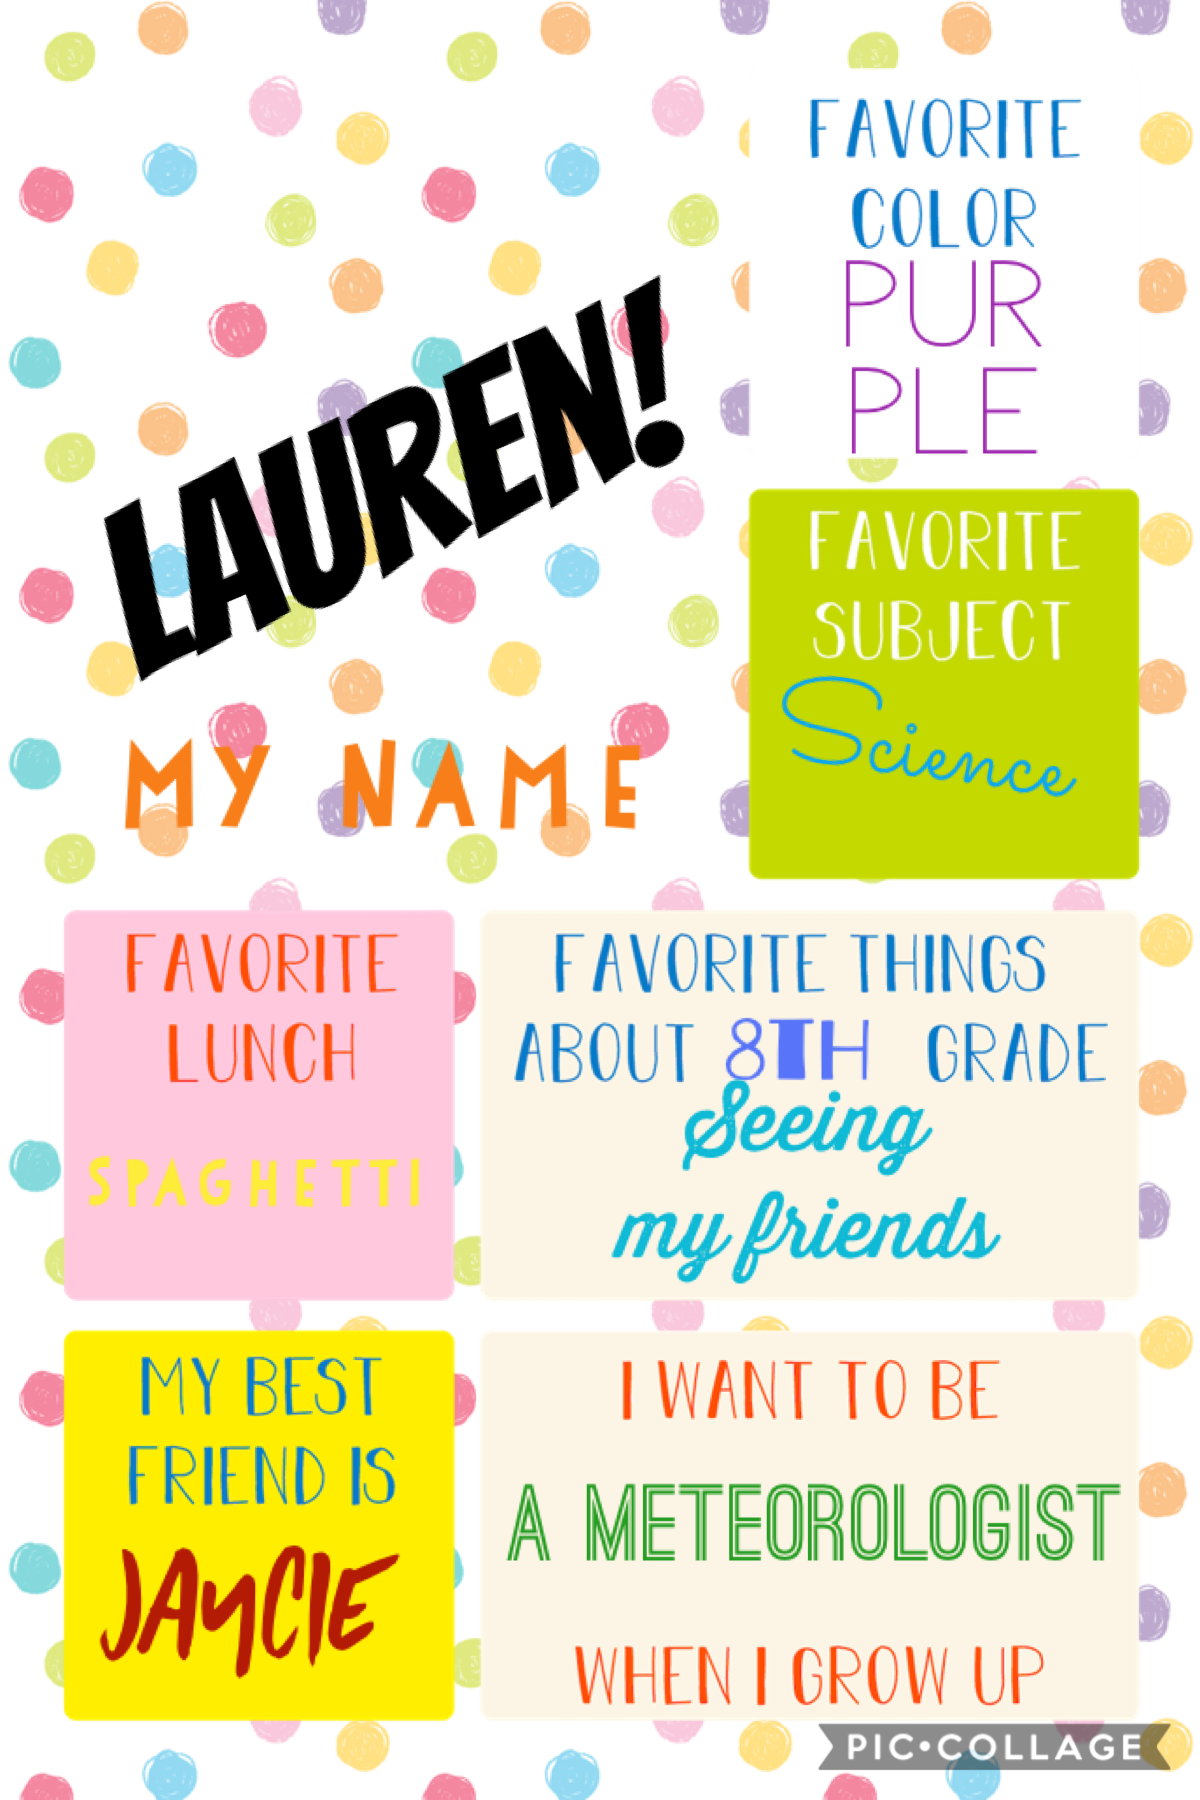 A trial back to school template from @PicCollage! Just info about me and my back to school! Enjoy. 